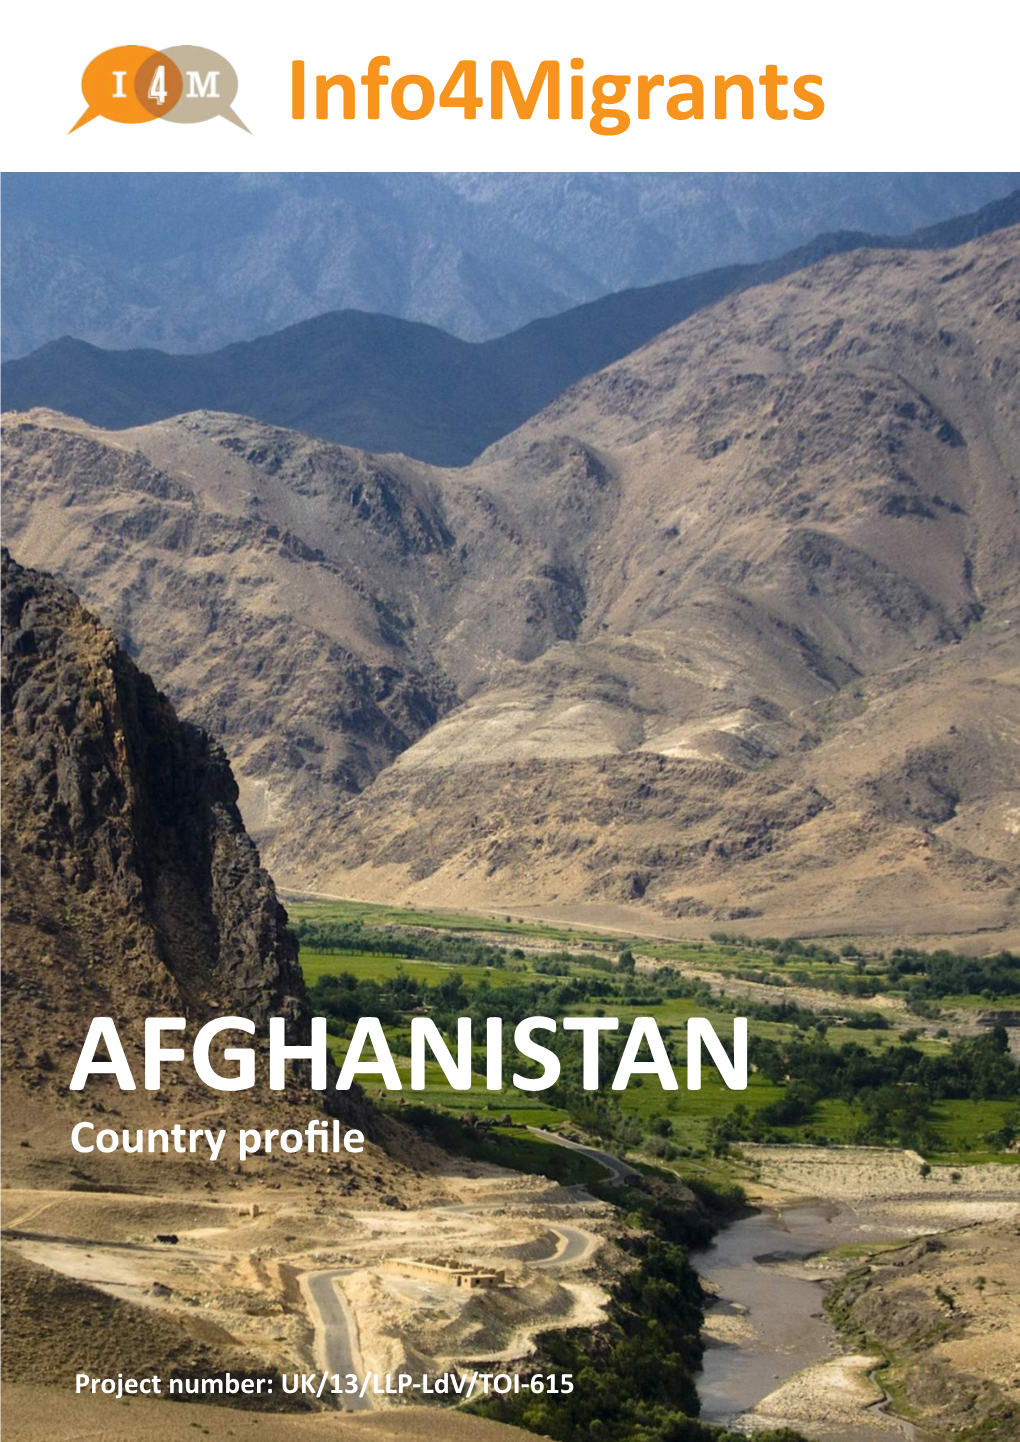 AFGHANISTAN Country Profile